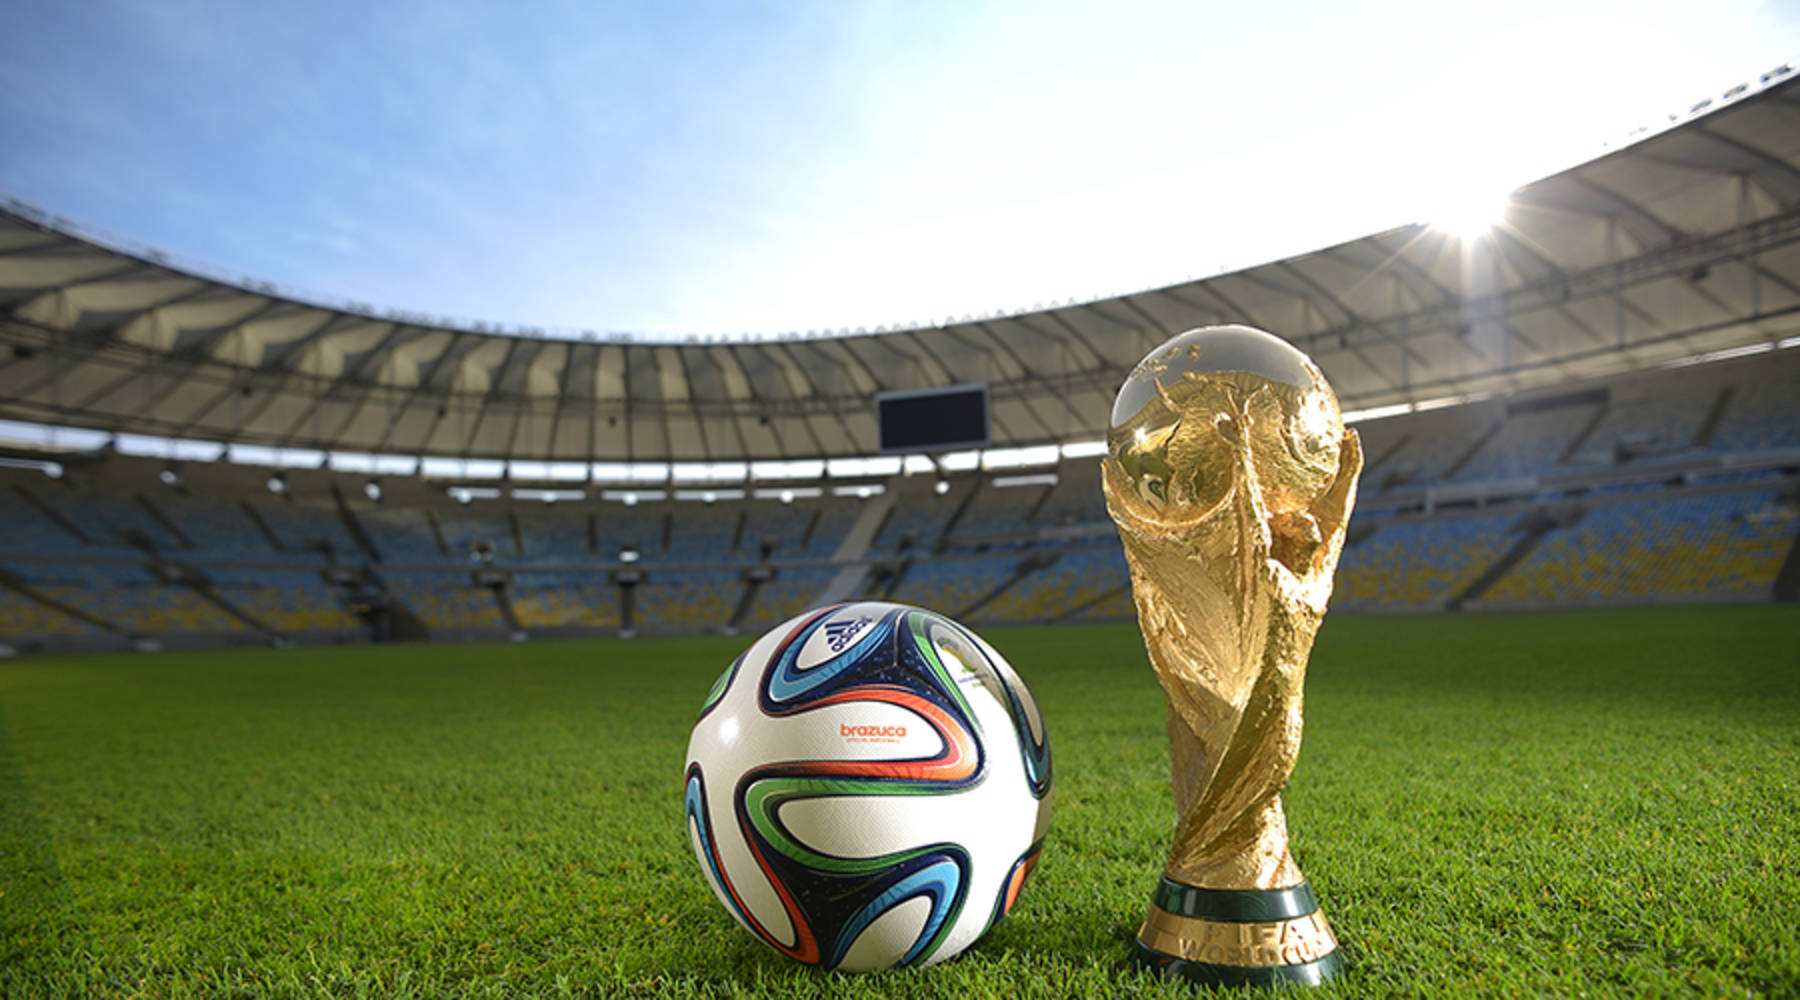 FIFA World Cup by the numbers